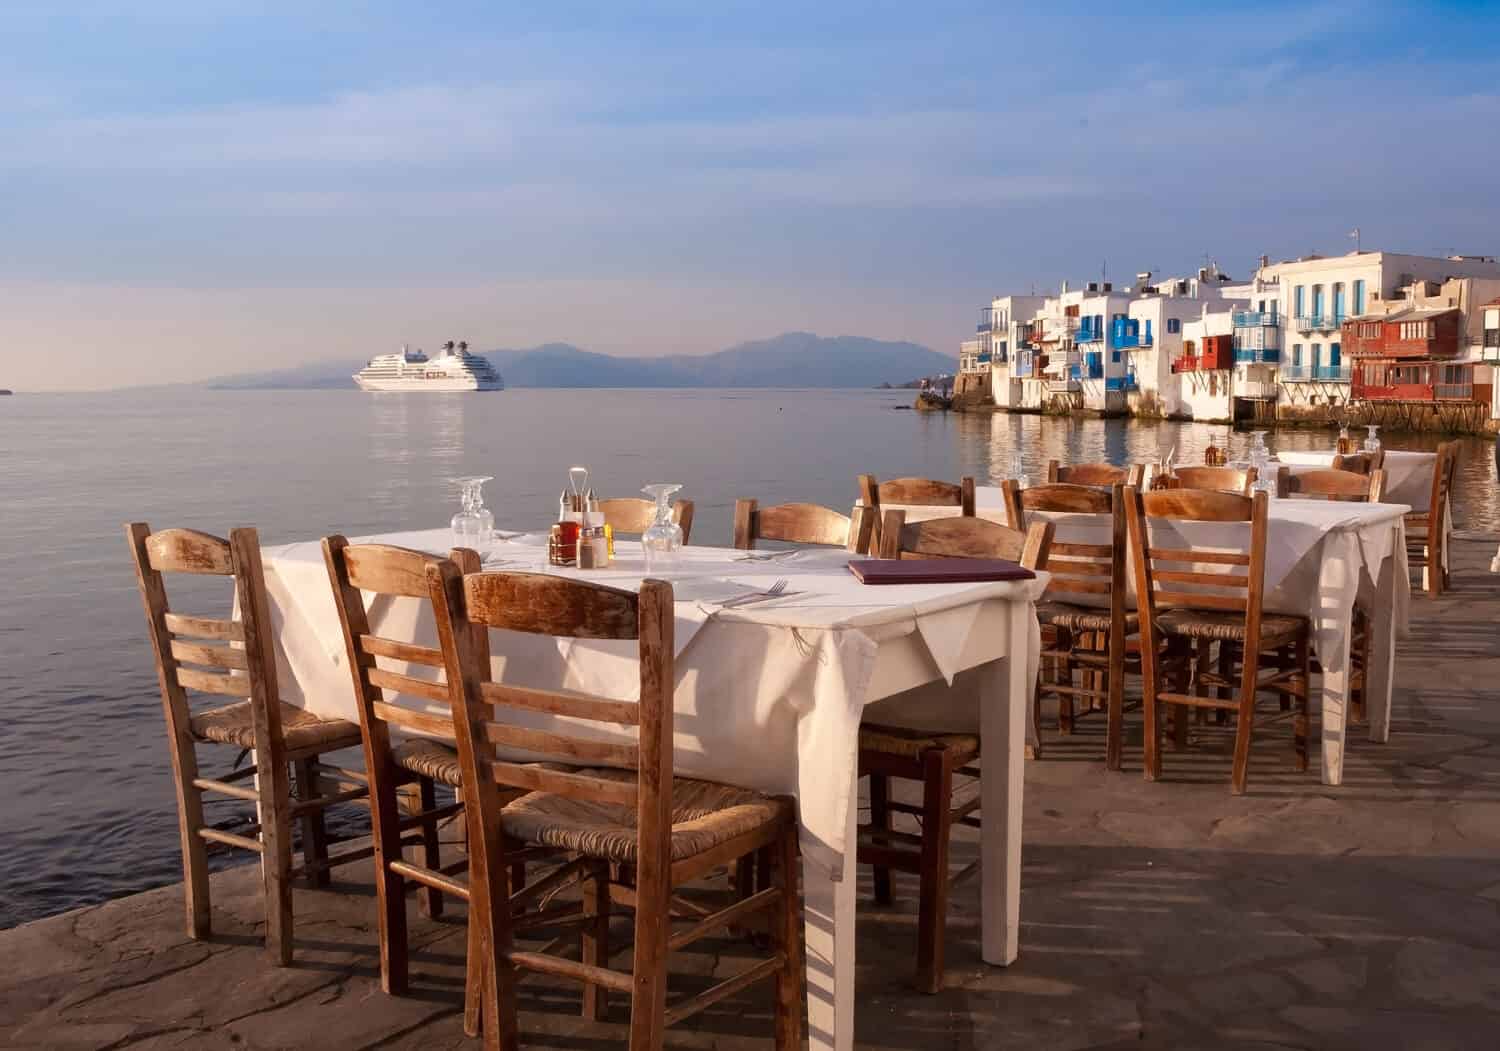 Restaurant near the sea at Little Venice on the island of Mykonos in Greece at sunset - very well-known